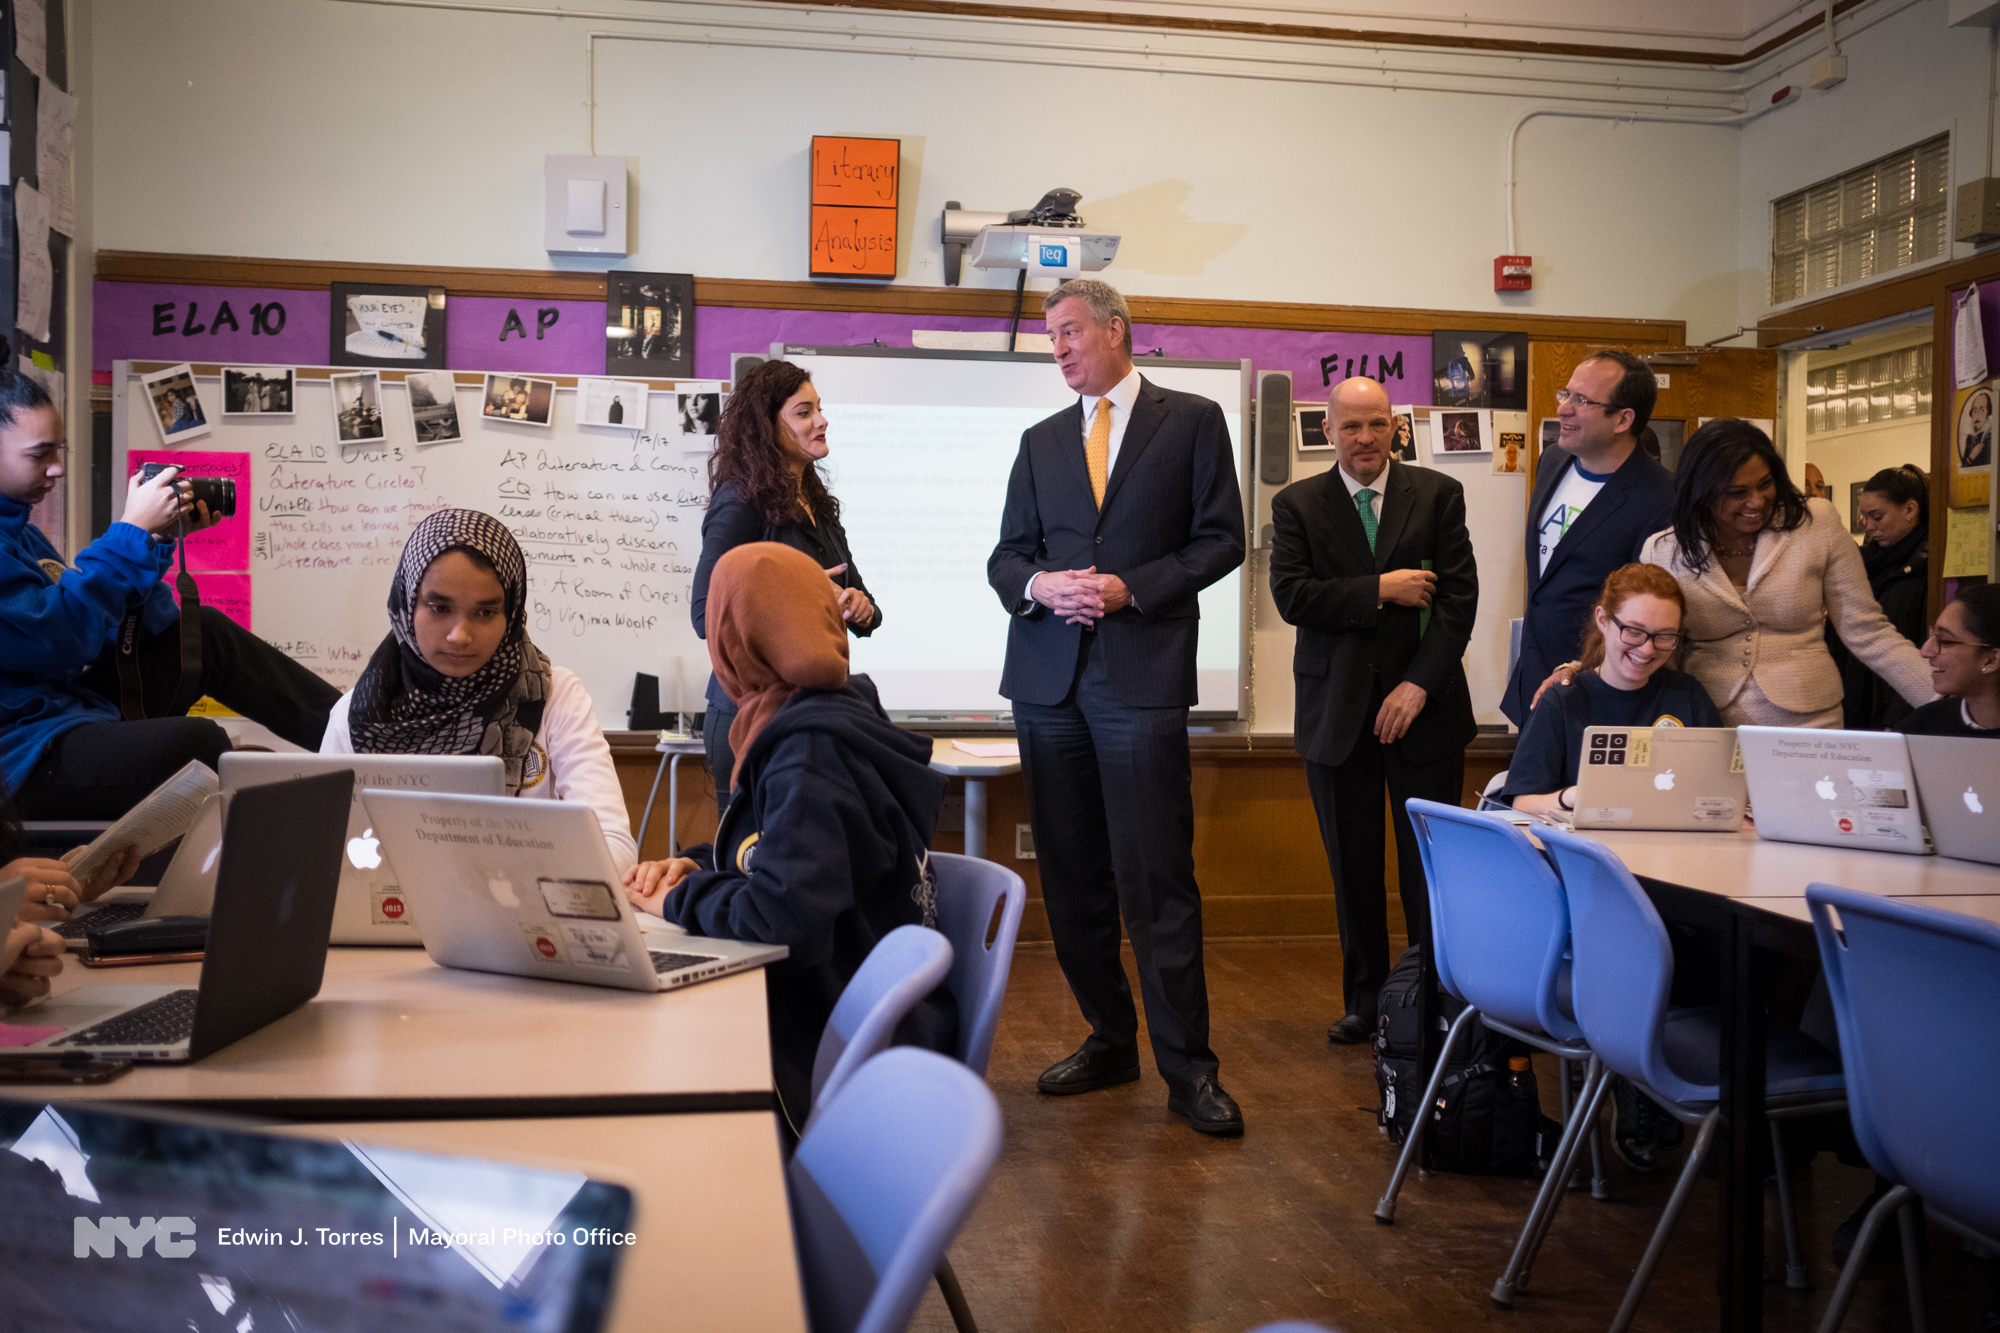 New York City Mayor Bill de Blasio and Chancellor Farina announce highest rate of passing students in Advance Placement exams in NYC and the expansion of up to 5 AP classes in NYC schools by 2021 at the Young Woman’s Leadership School in Astoria, Queens on Tuesday, January 17th, 2017. Edwin J. Torres/ Mayoral Photography Office.